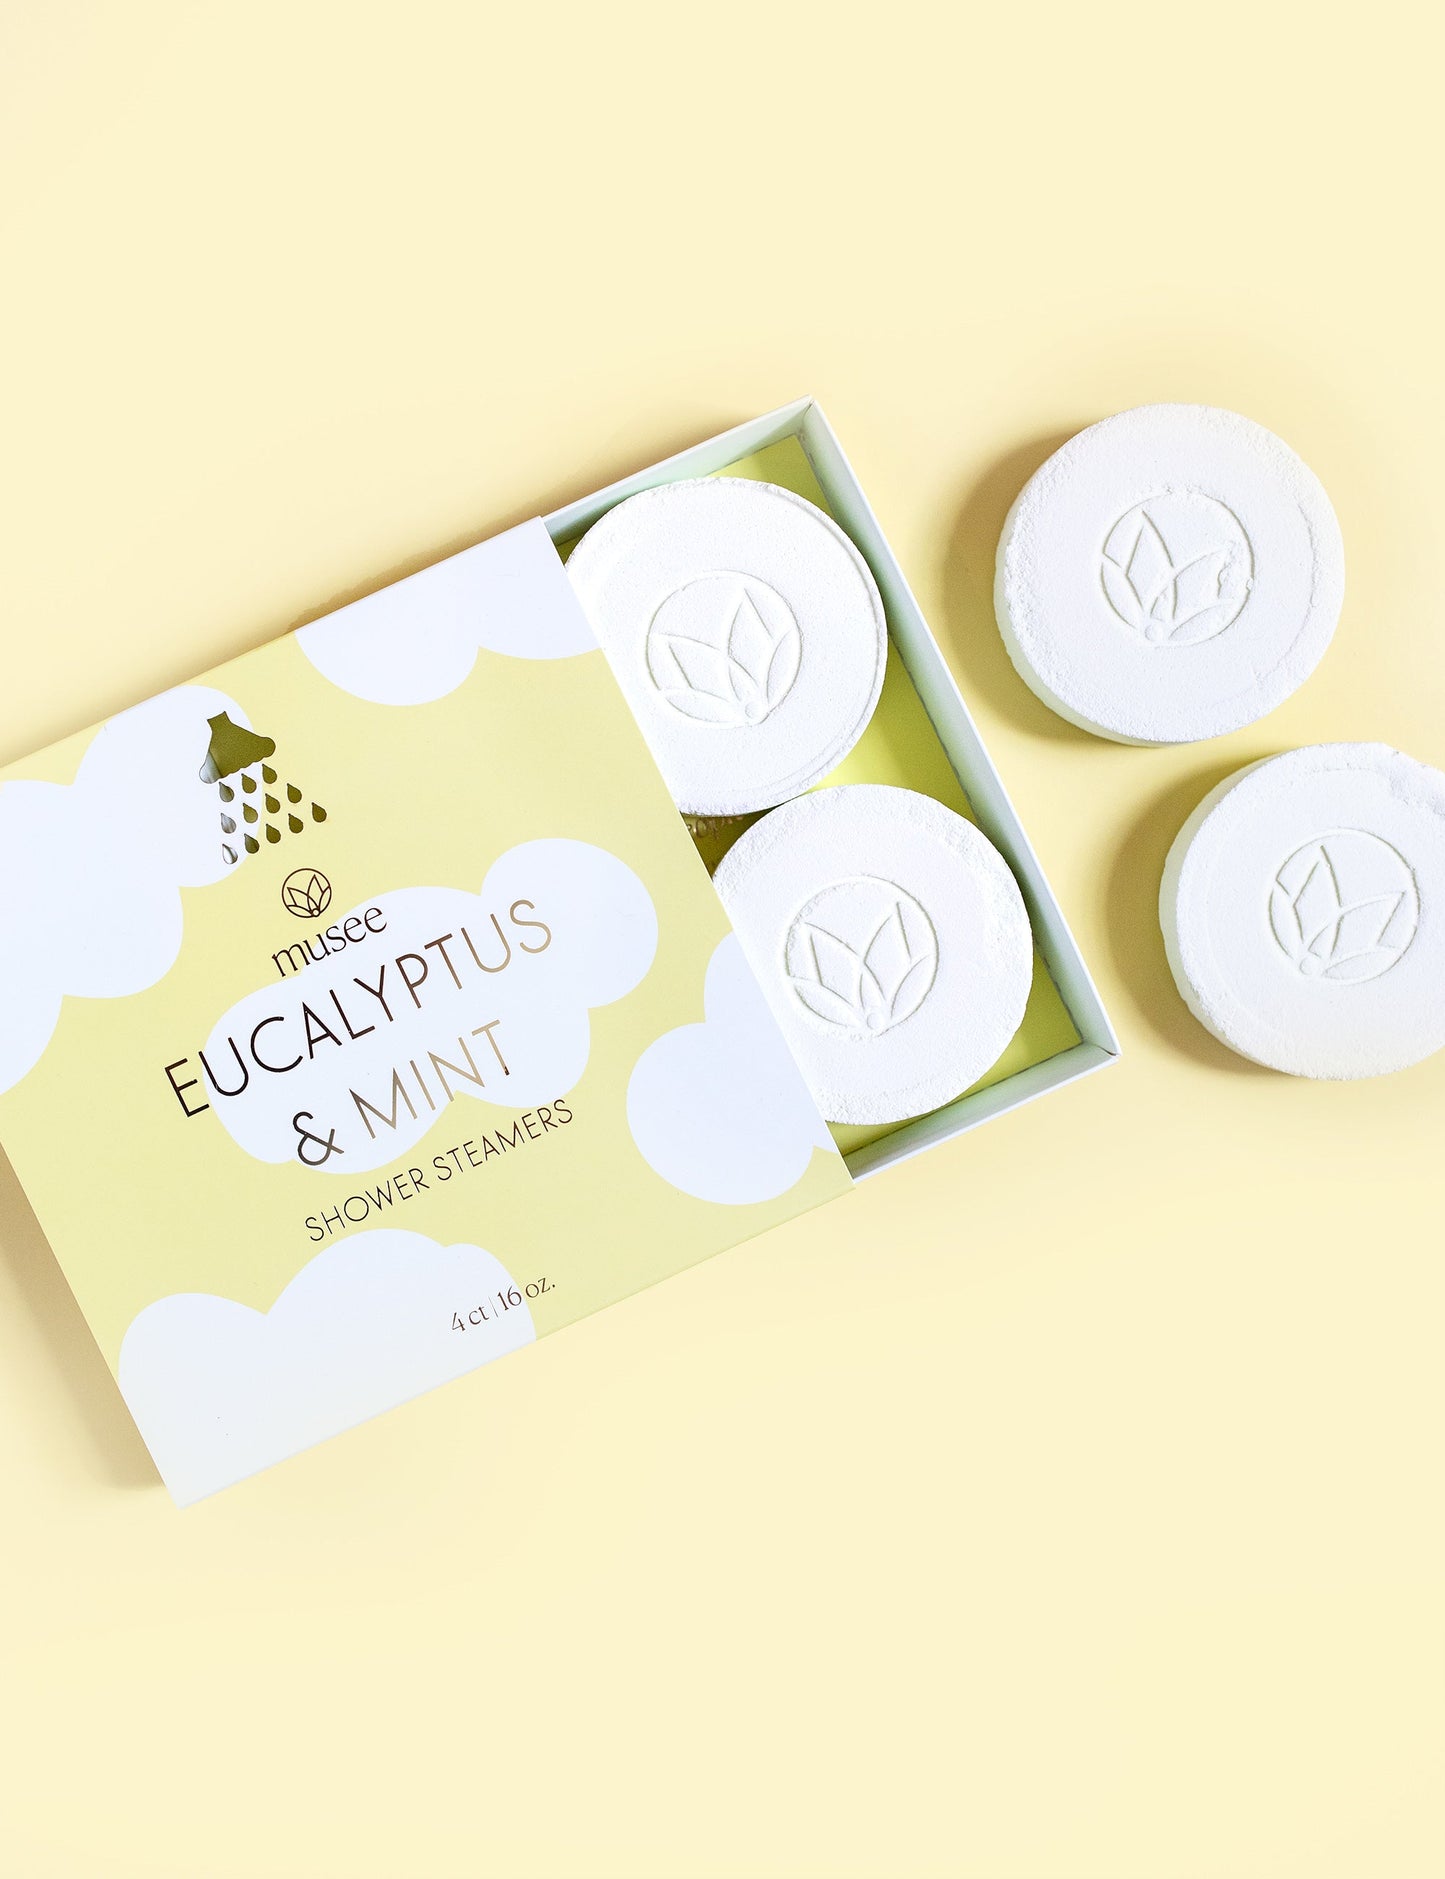 Musee Shower Steamers - Eucalyptus & Mint